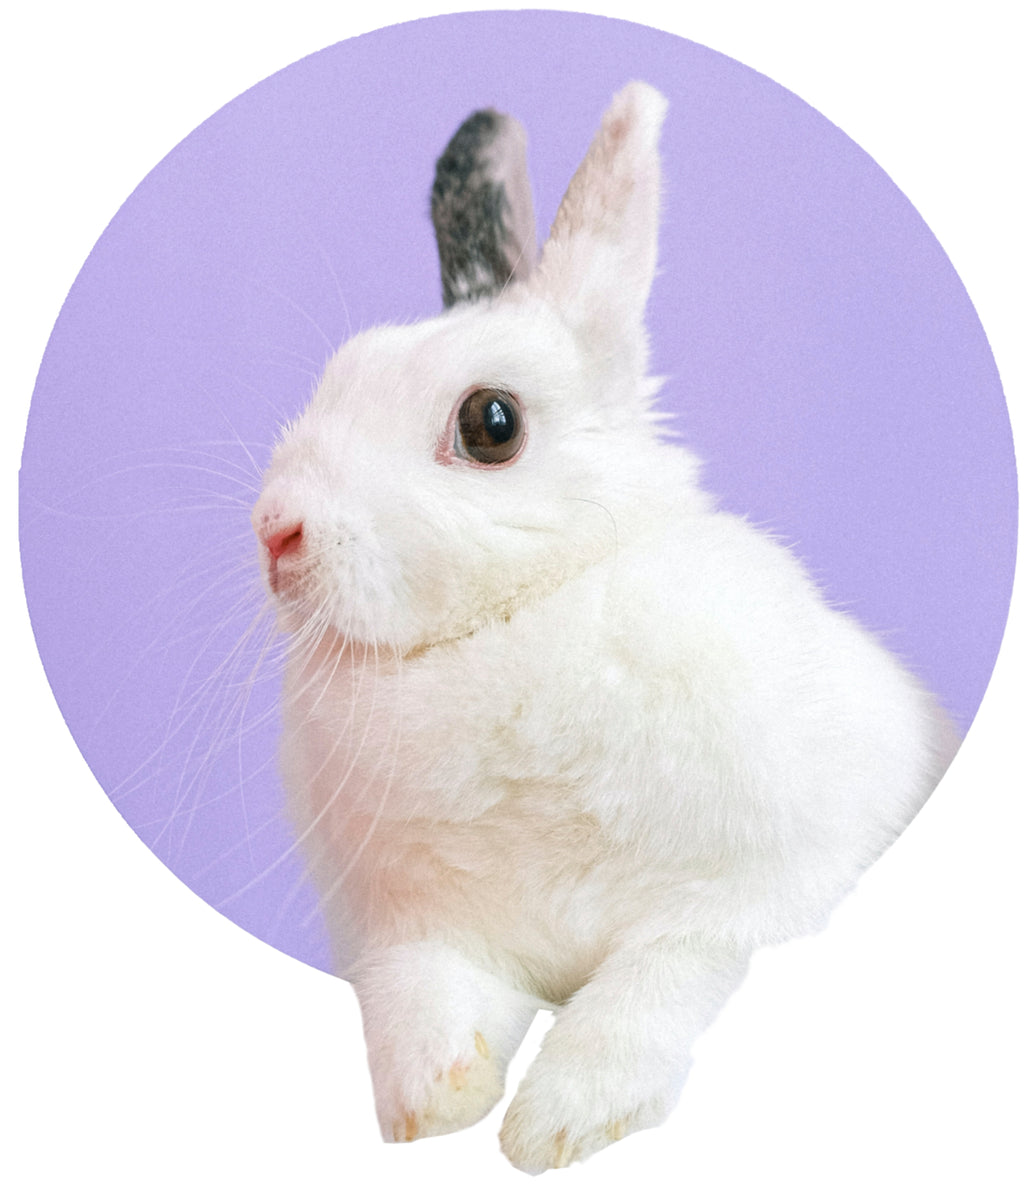 Rabbit store for products and supplies. Promoting bunny welfare, health and safe play. , 